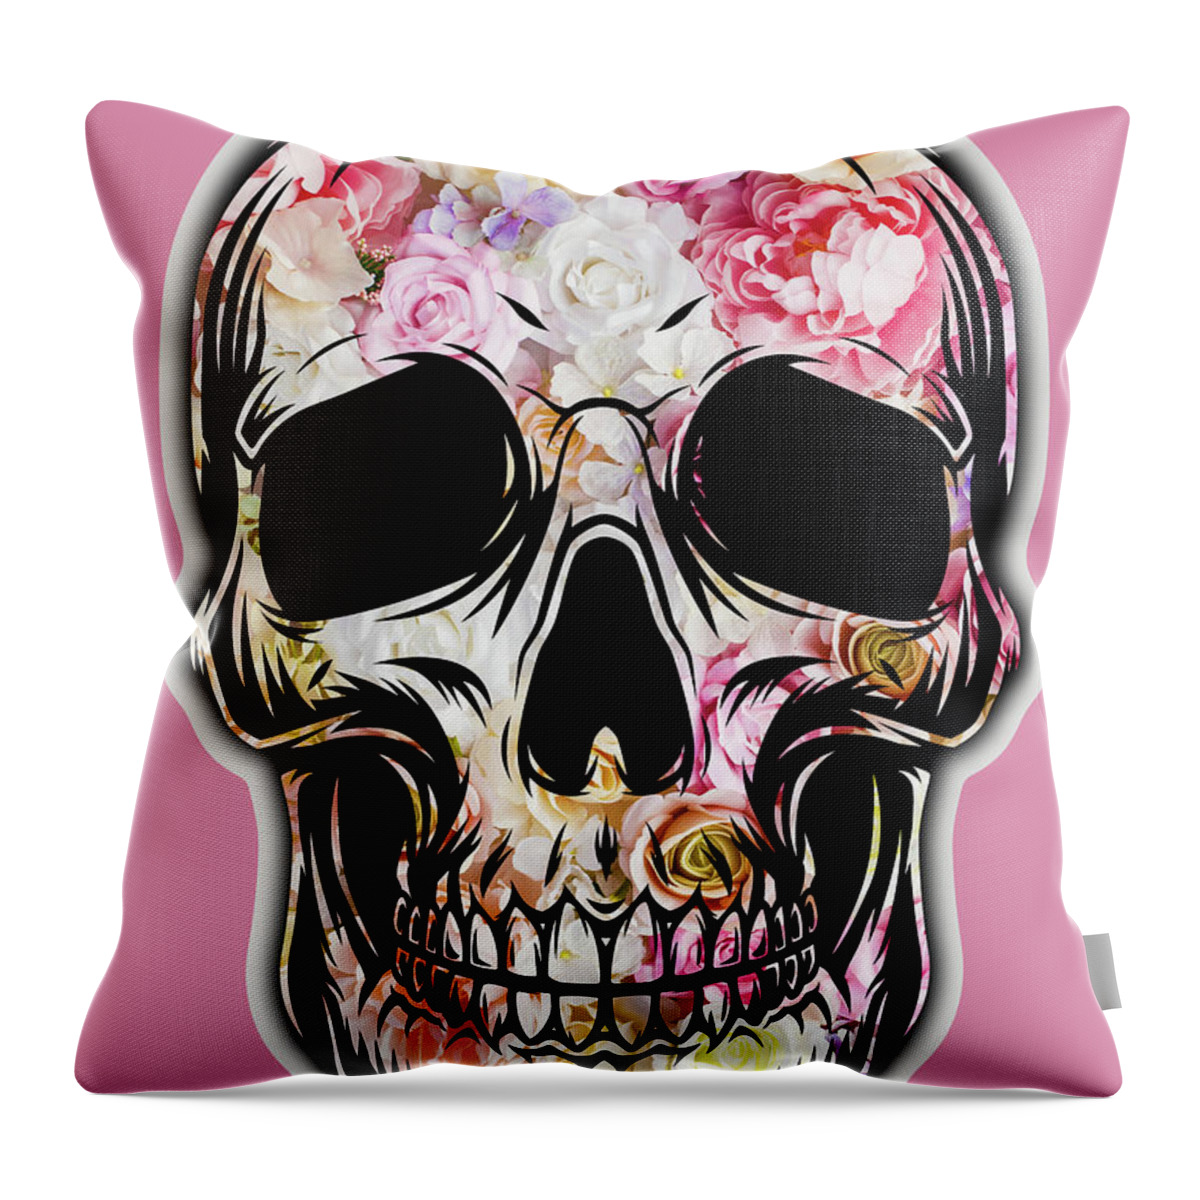 Skull Throw Pillow featuring the painting Skull Flowers Floral by Tony Rubino